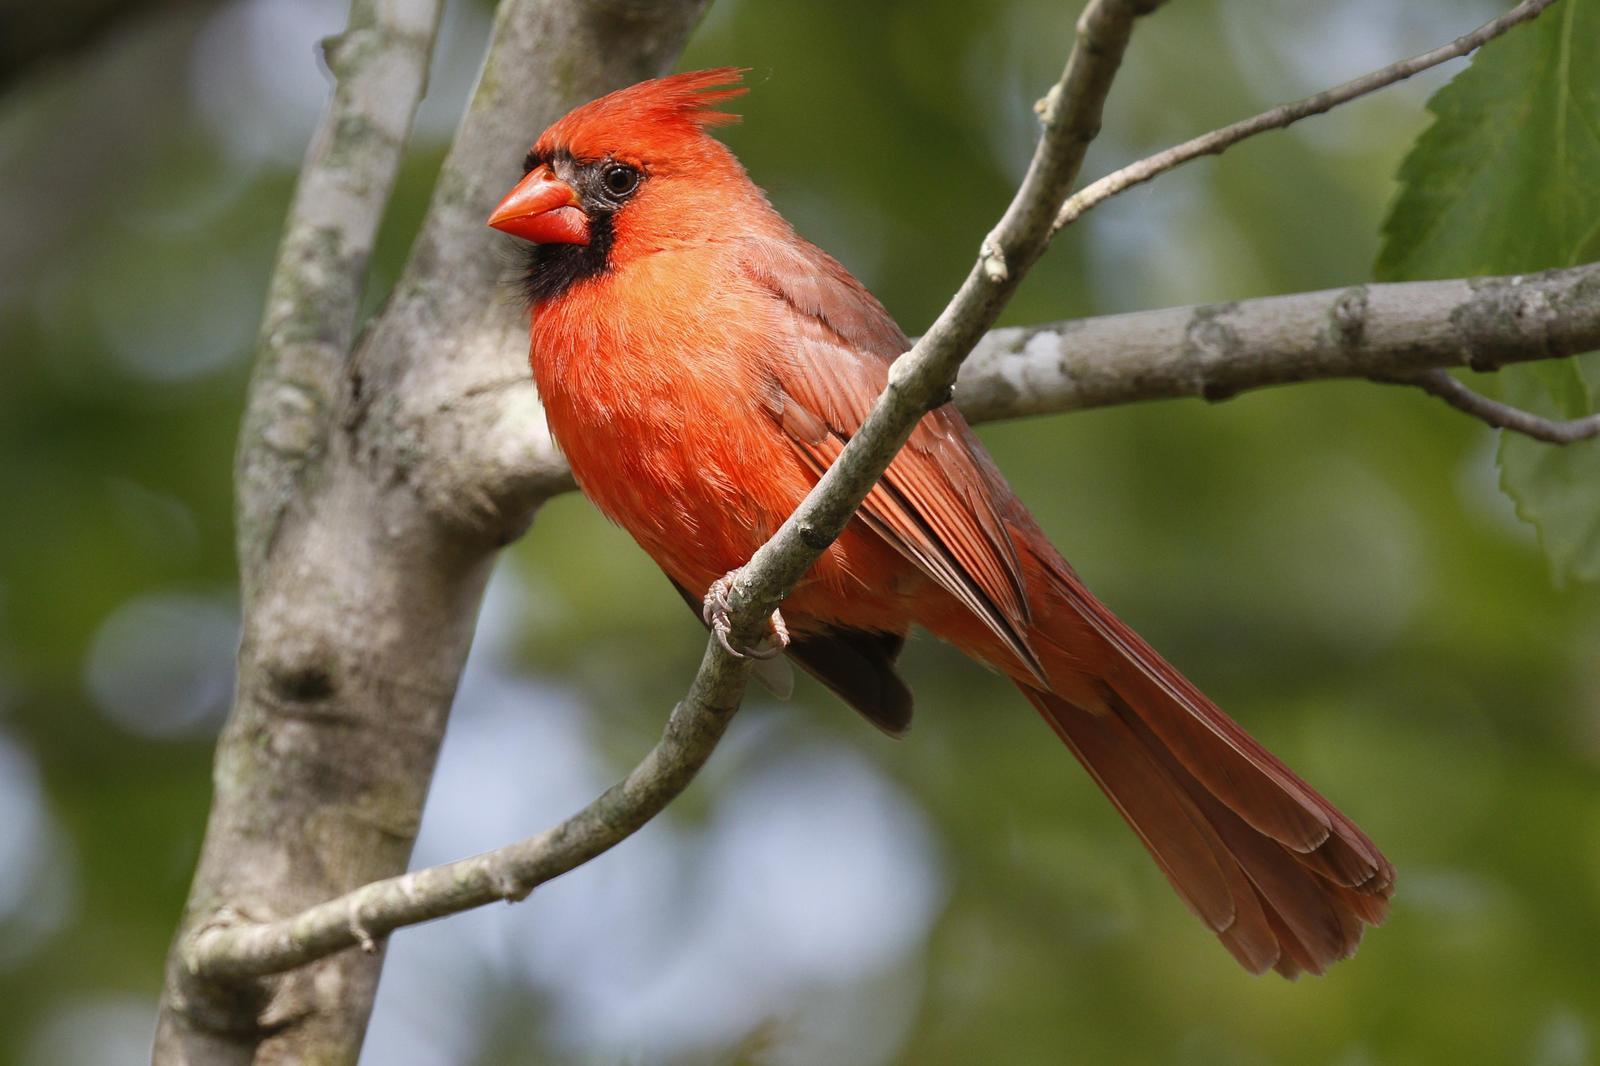 Northern Cardinal Photo by Emily Willoughby